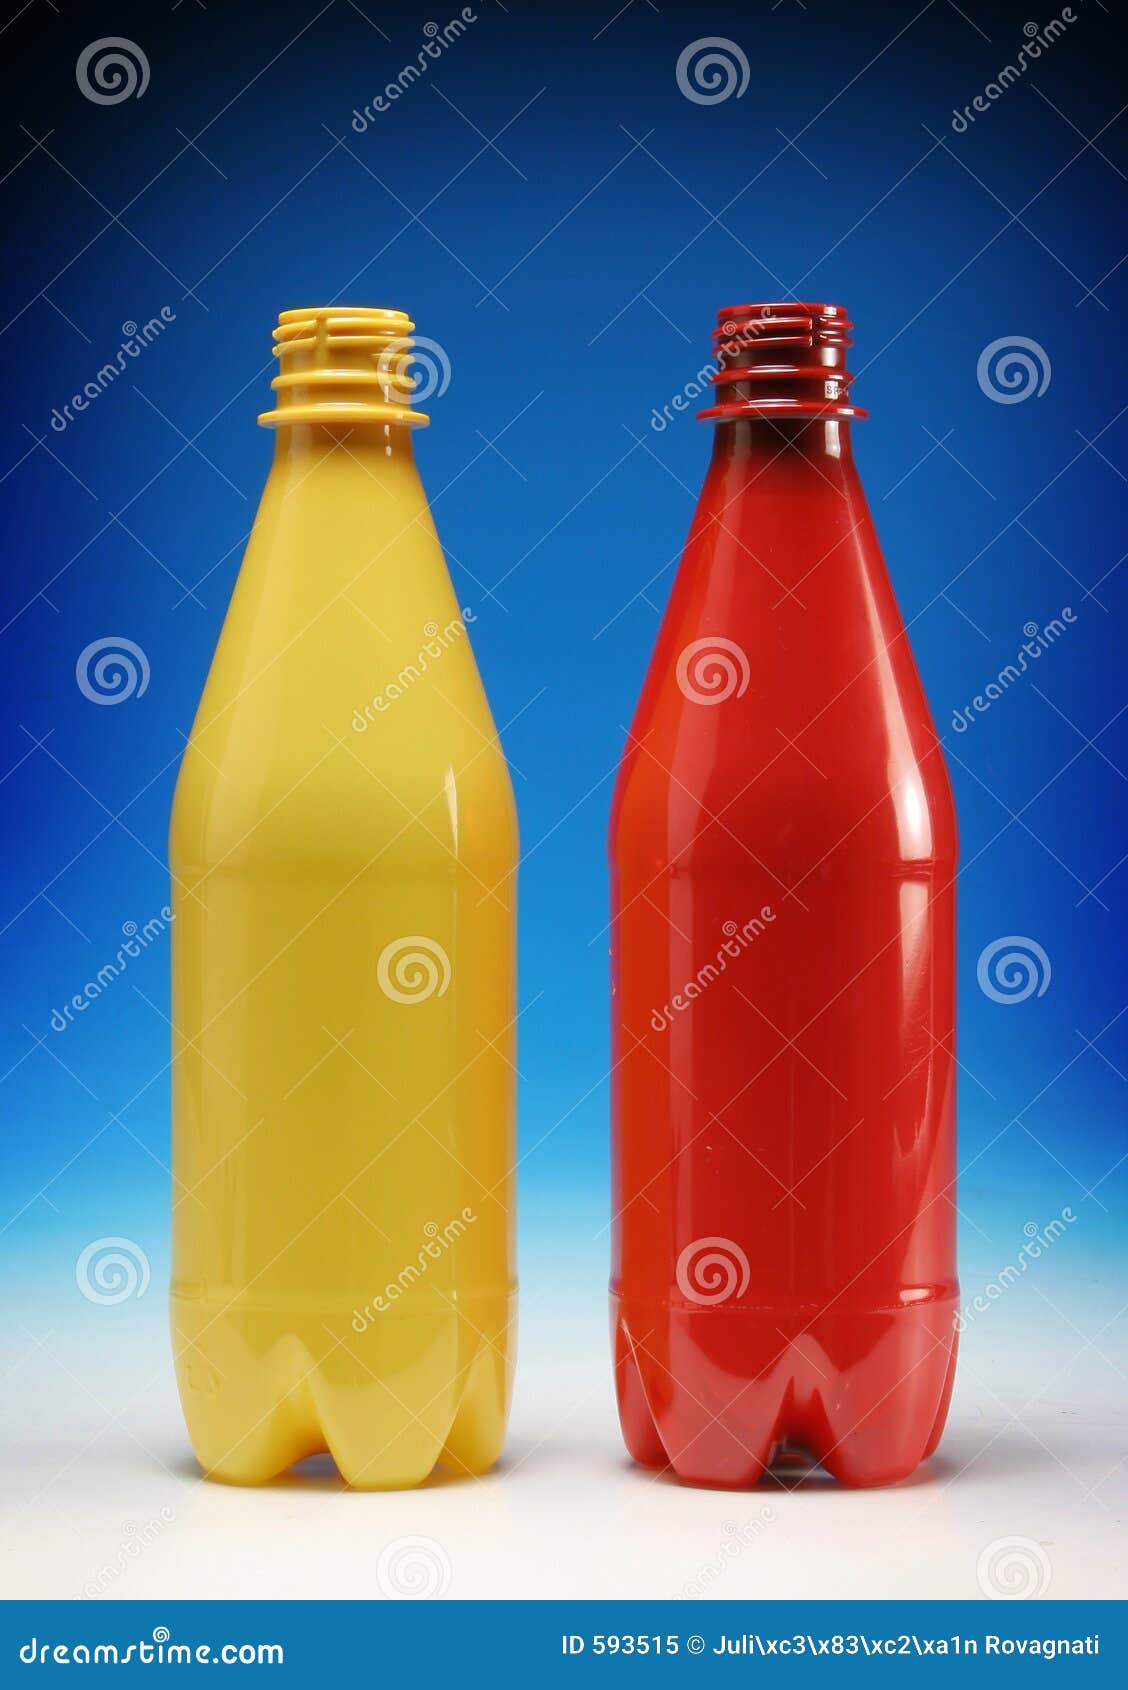 Download Plastic Bottles Yellow And Red Stock Image Image Of Beverages Drinks 593515 Yellowimages Mockups